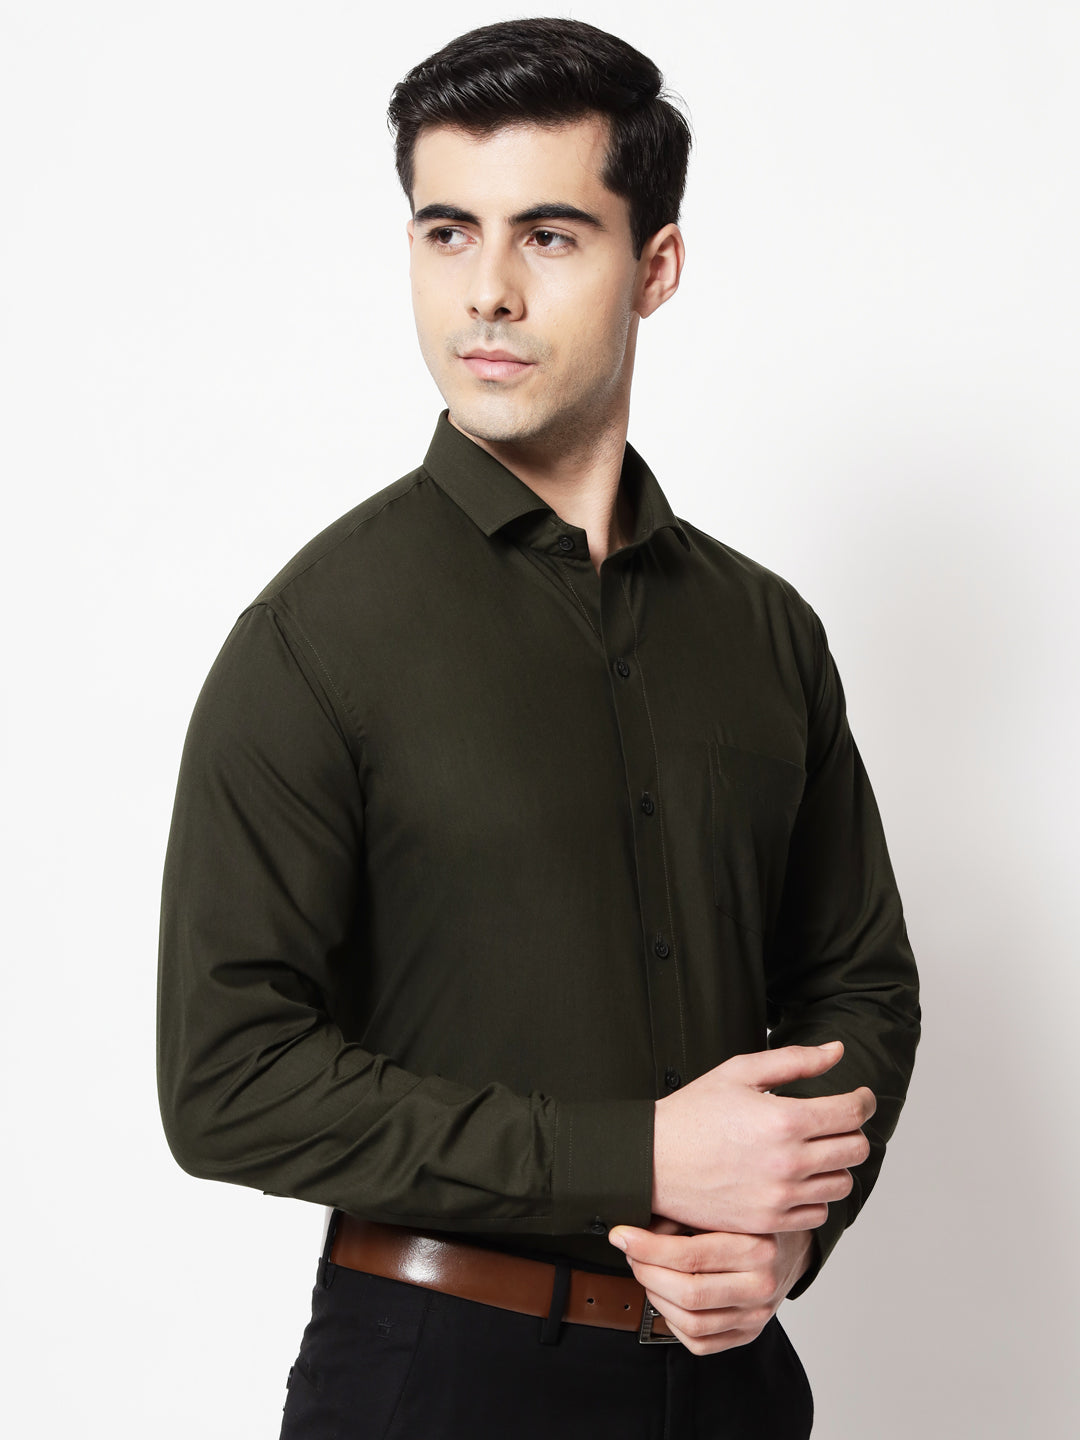 Black and White Shirts Bottle Green Plain Solid Shirt